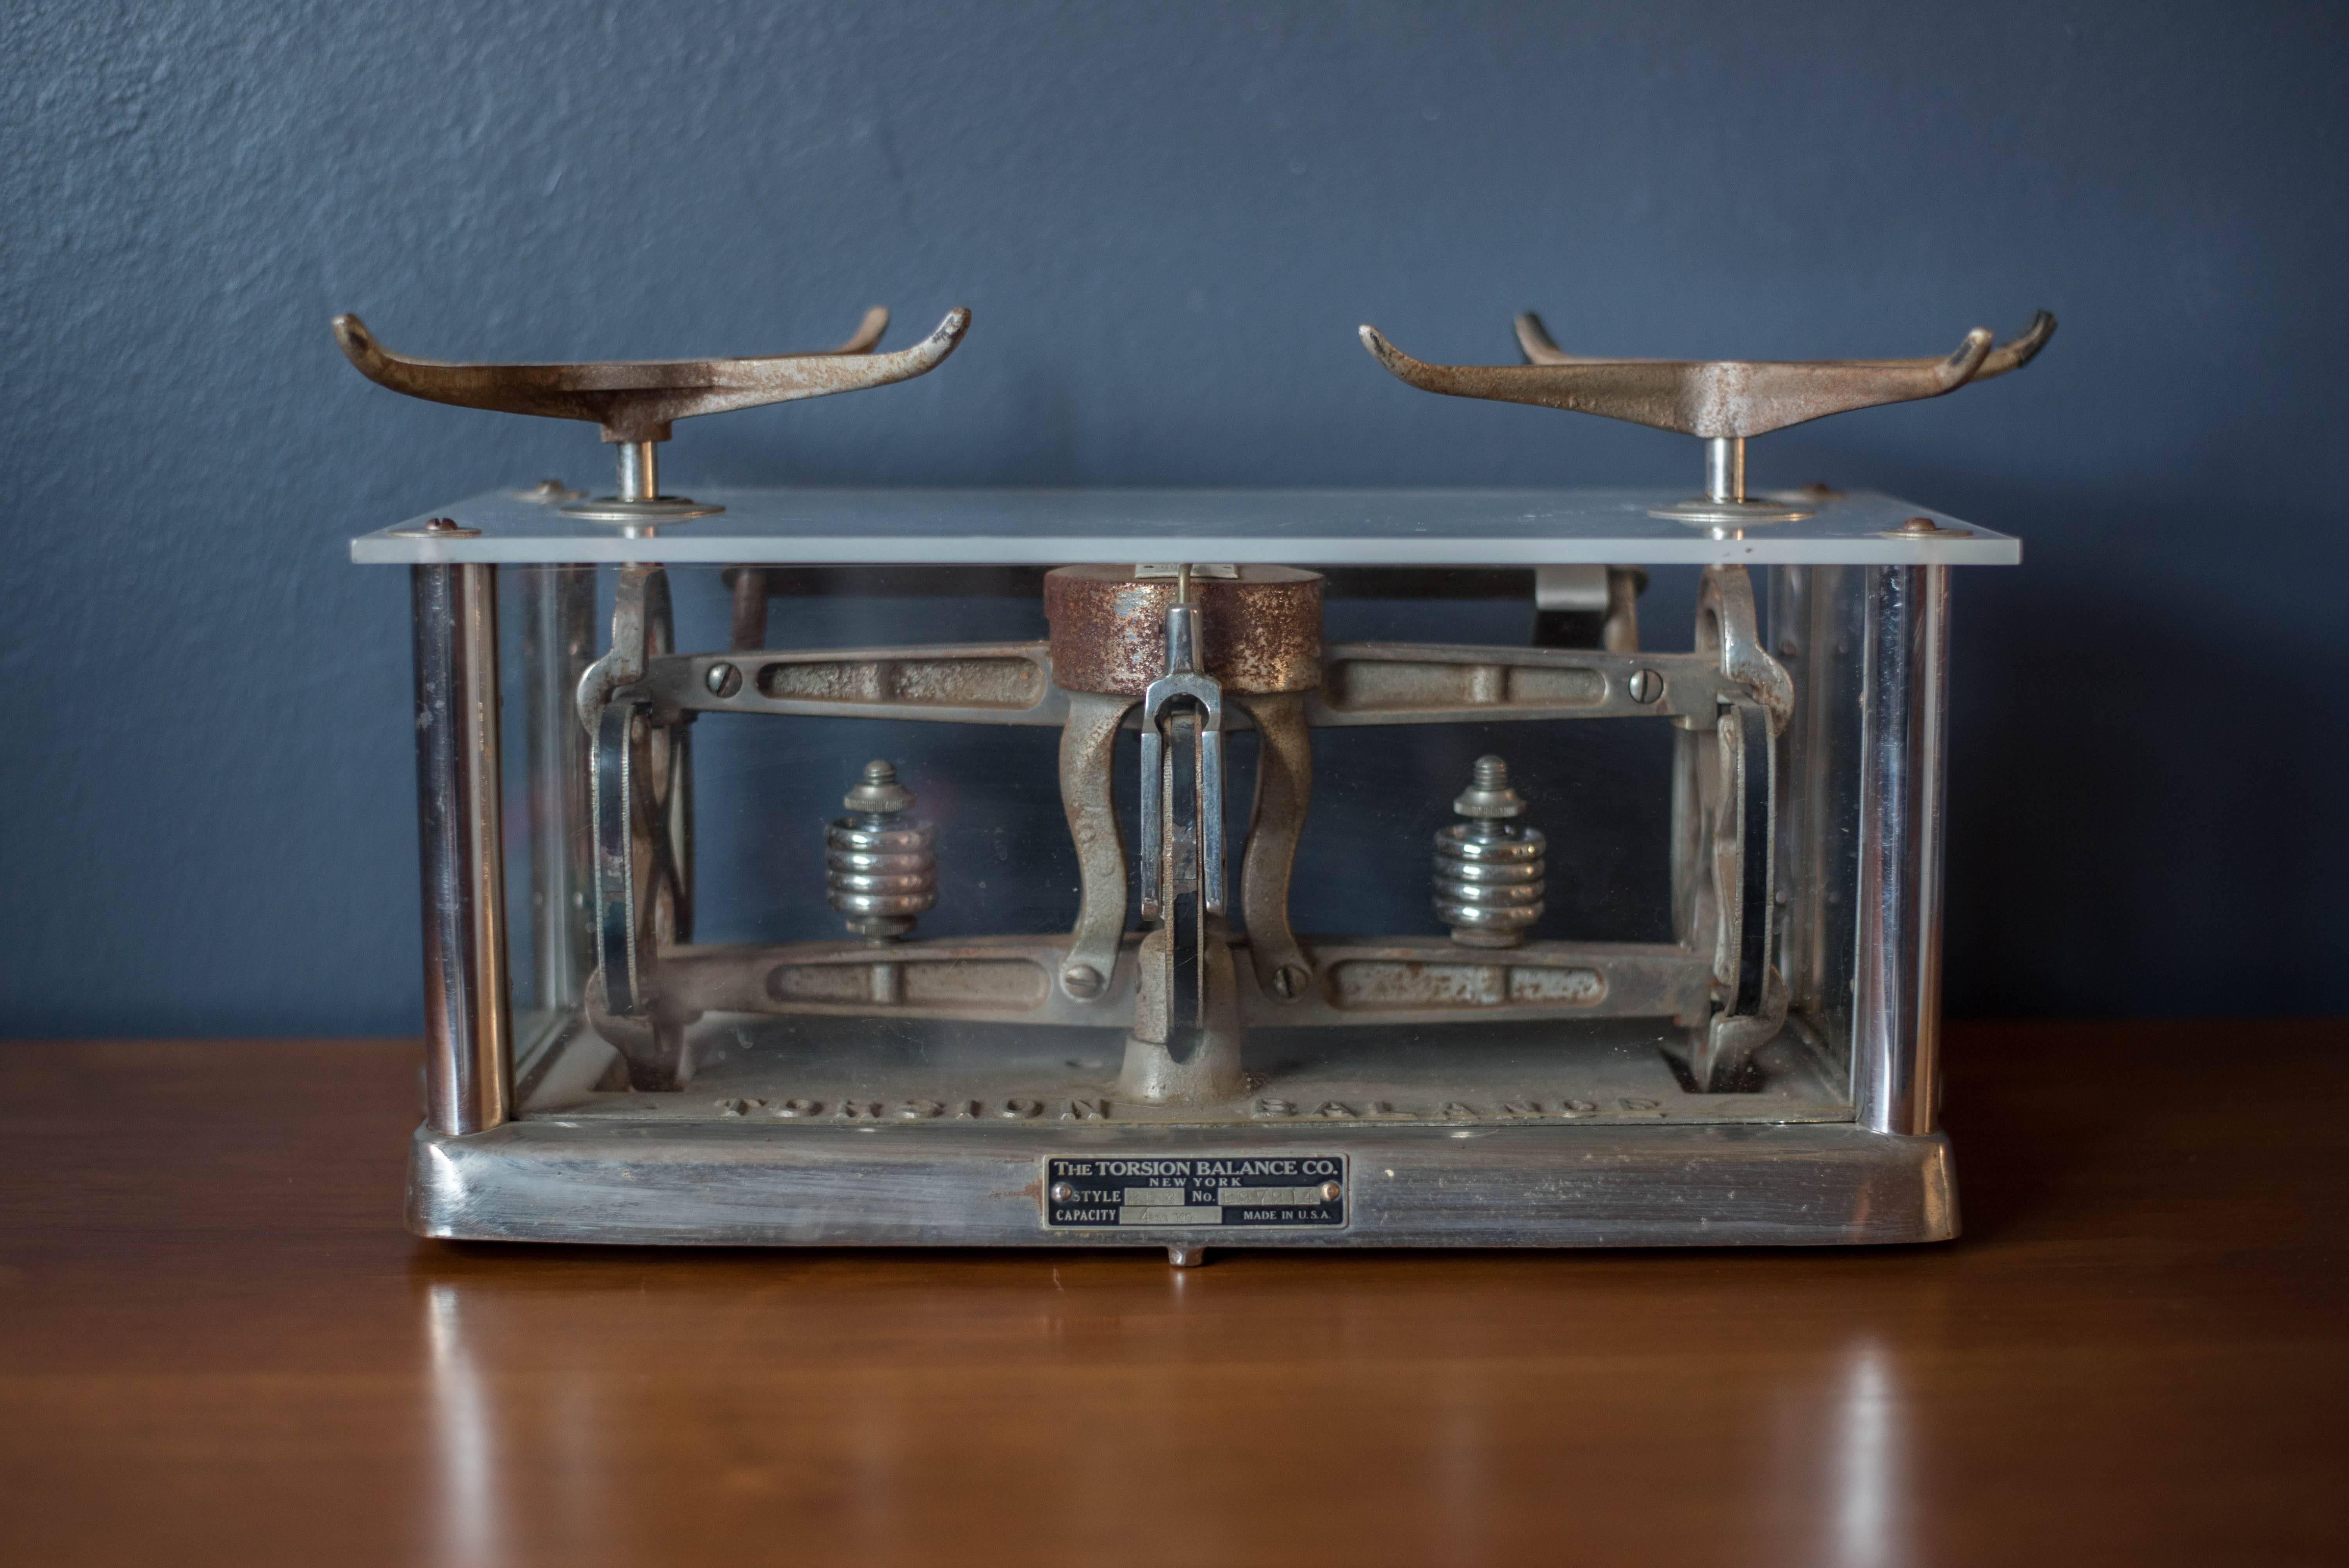 Industrial apothecary pharmaceutical torsion balance scale from the early 1900s. Balance is encased in glass and metal with a plexiglass top.